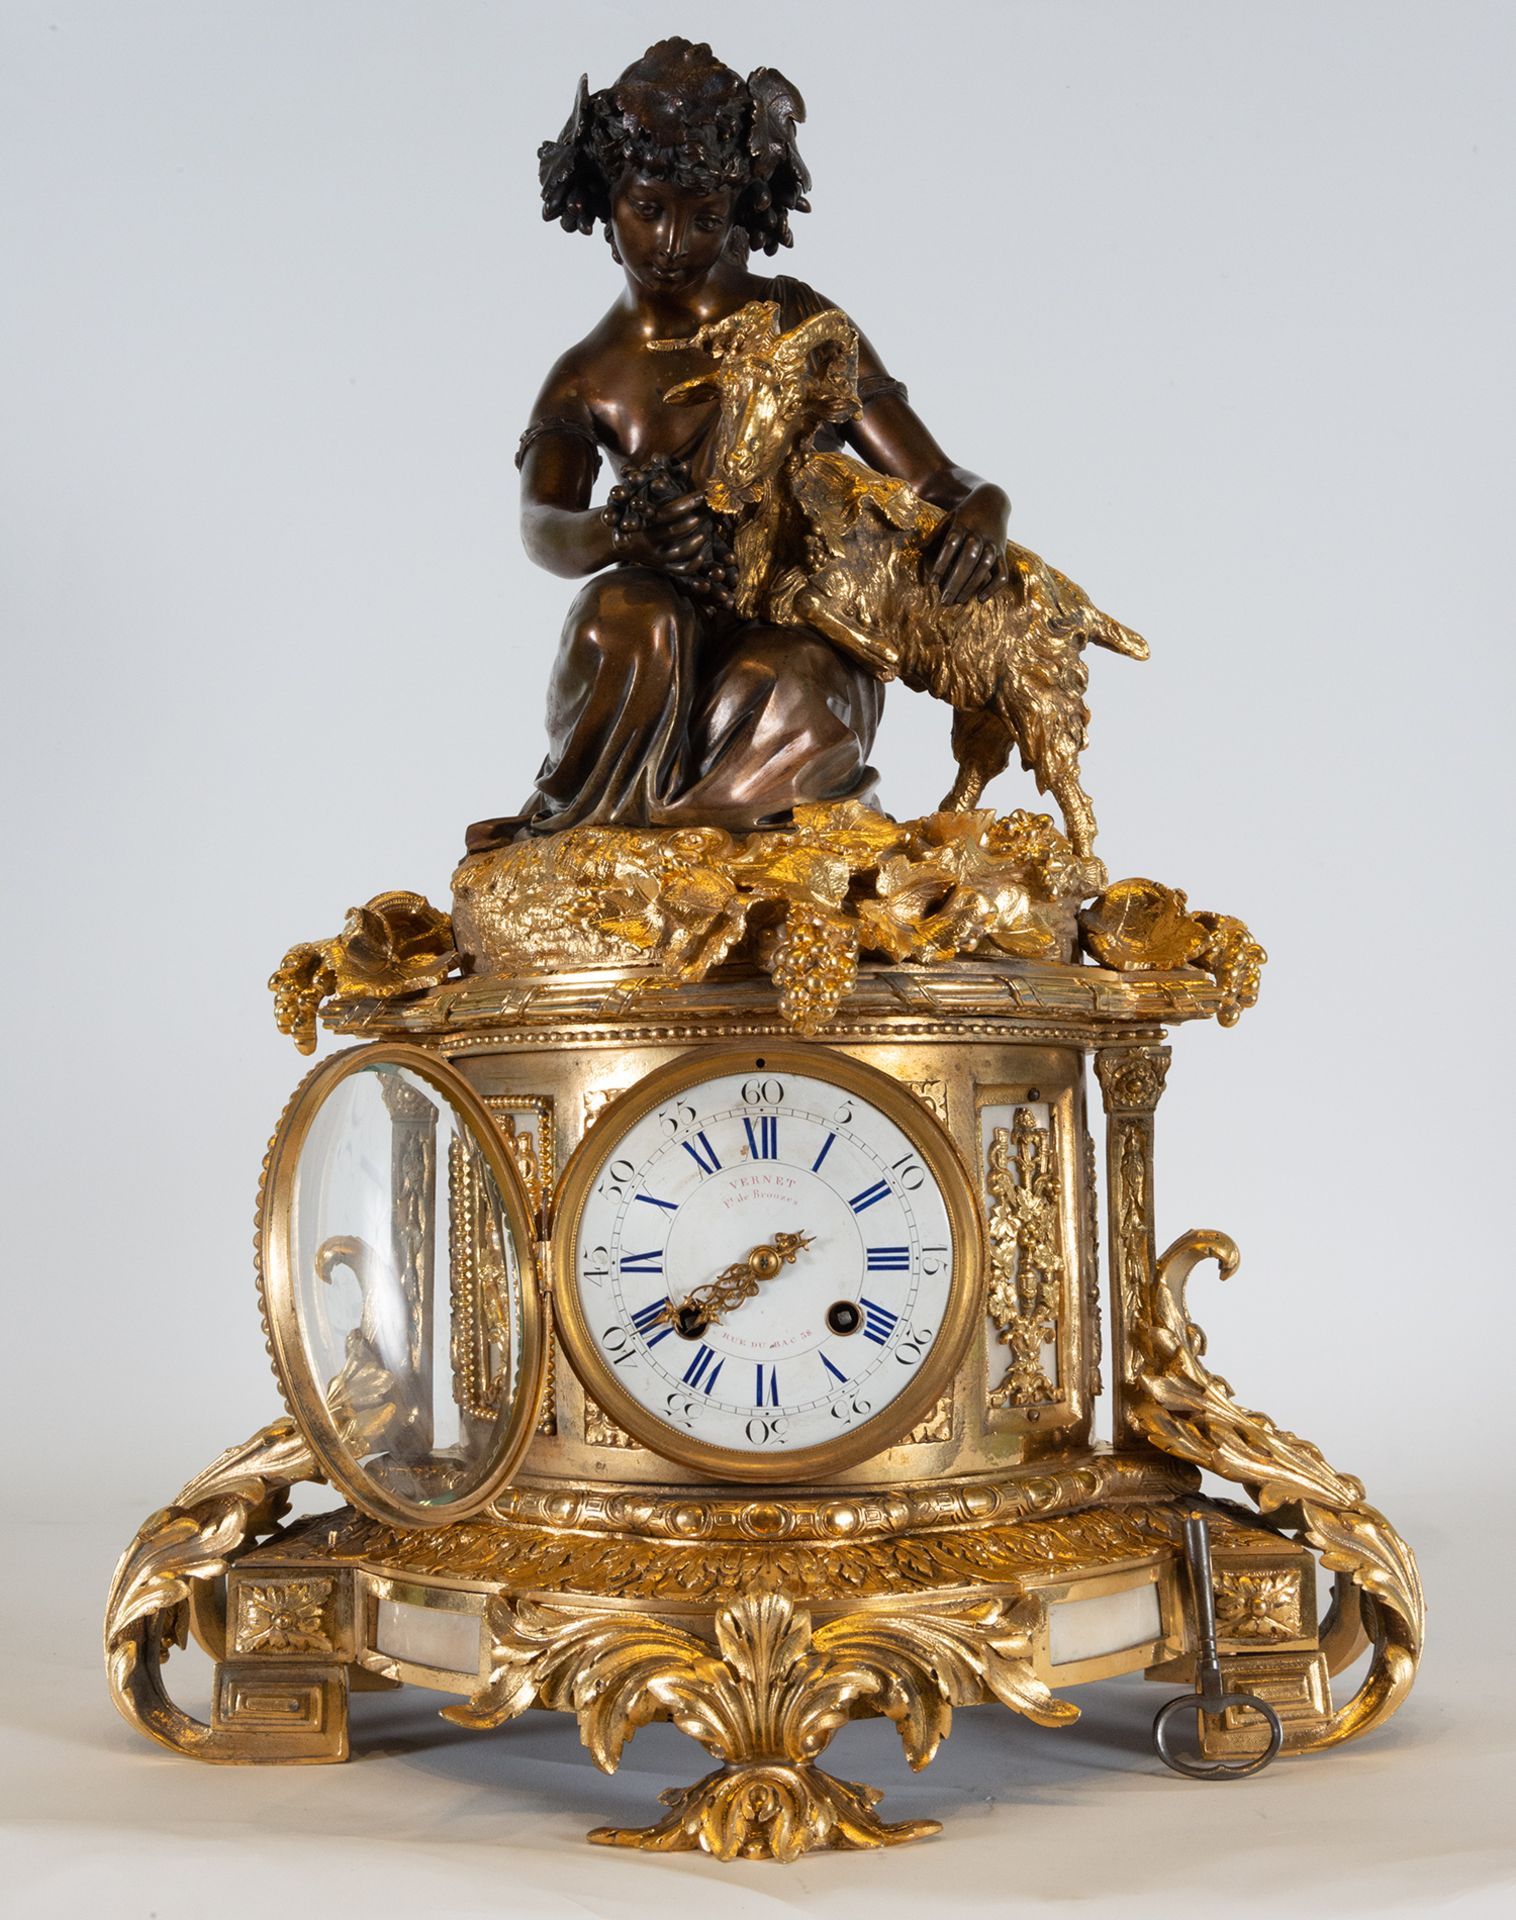 Exceptional Large French Tabletop Clock depicting Bacchus with Ram, Paris Machinery, circa 19th cent - Image 4 of 7